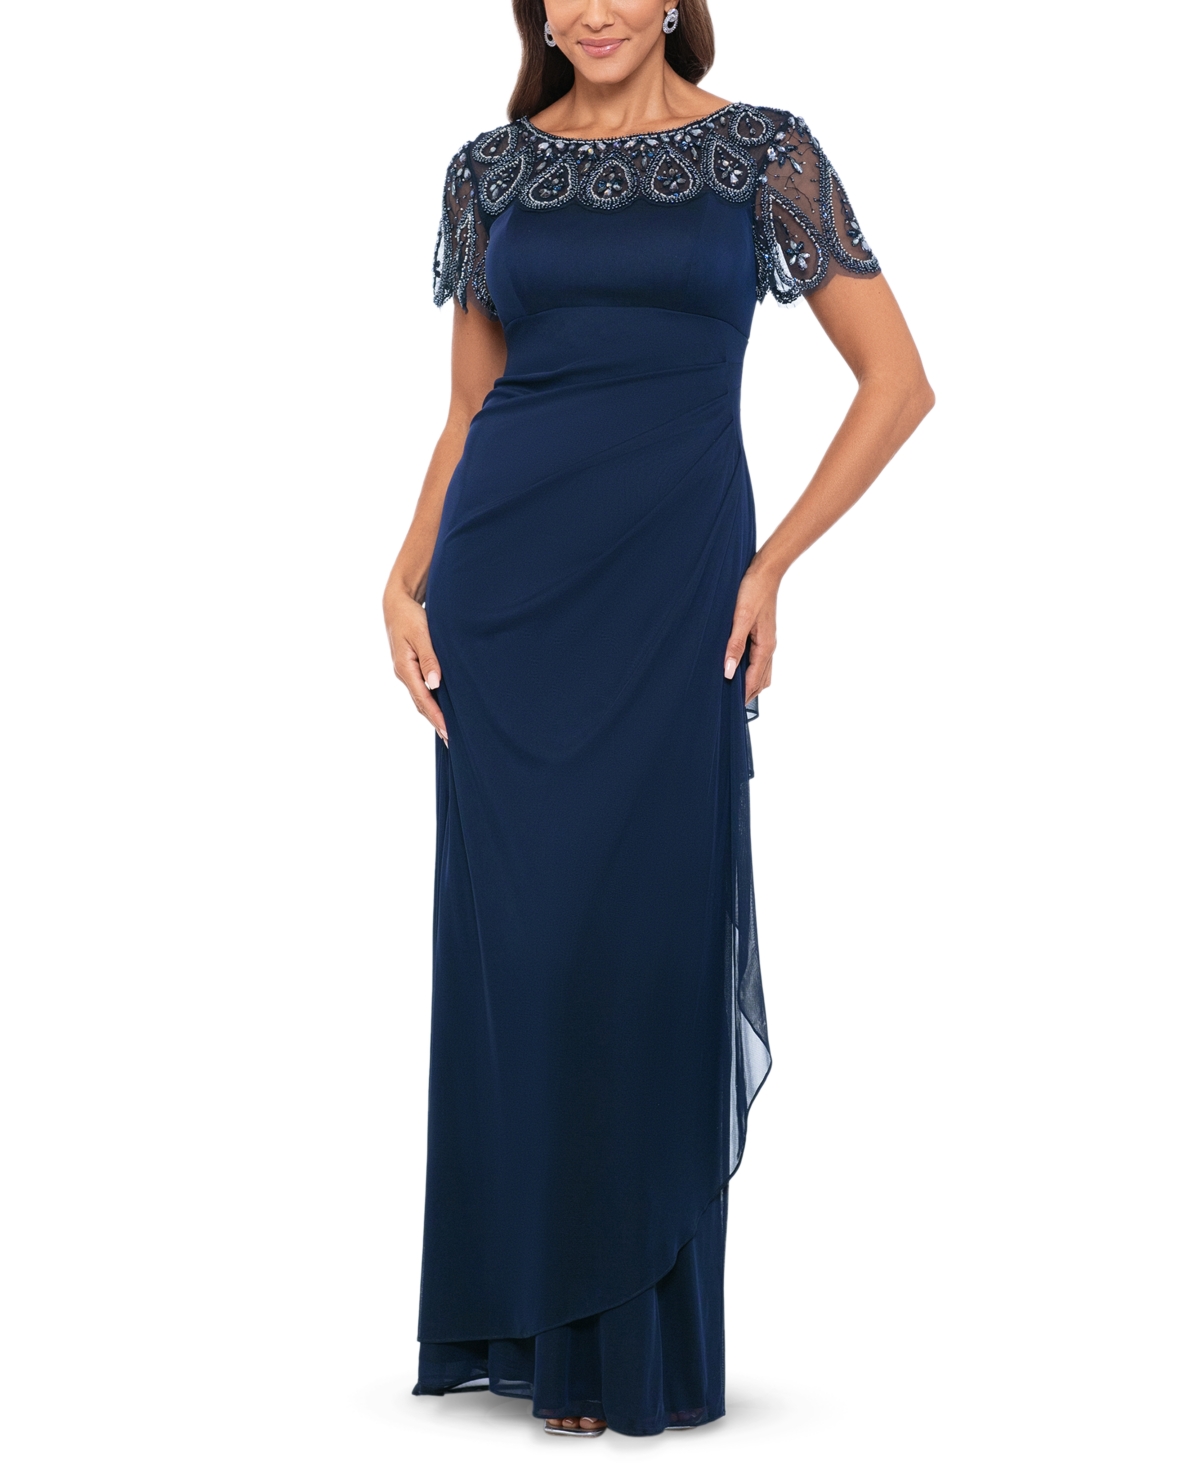 Women's Bead Embellished Short-Sleeve Gown - Navy